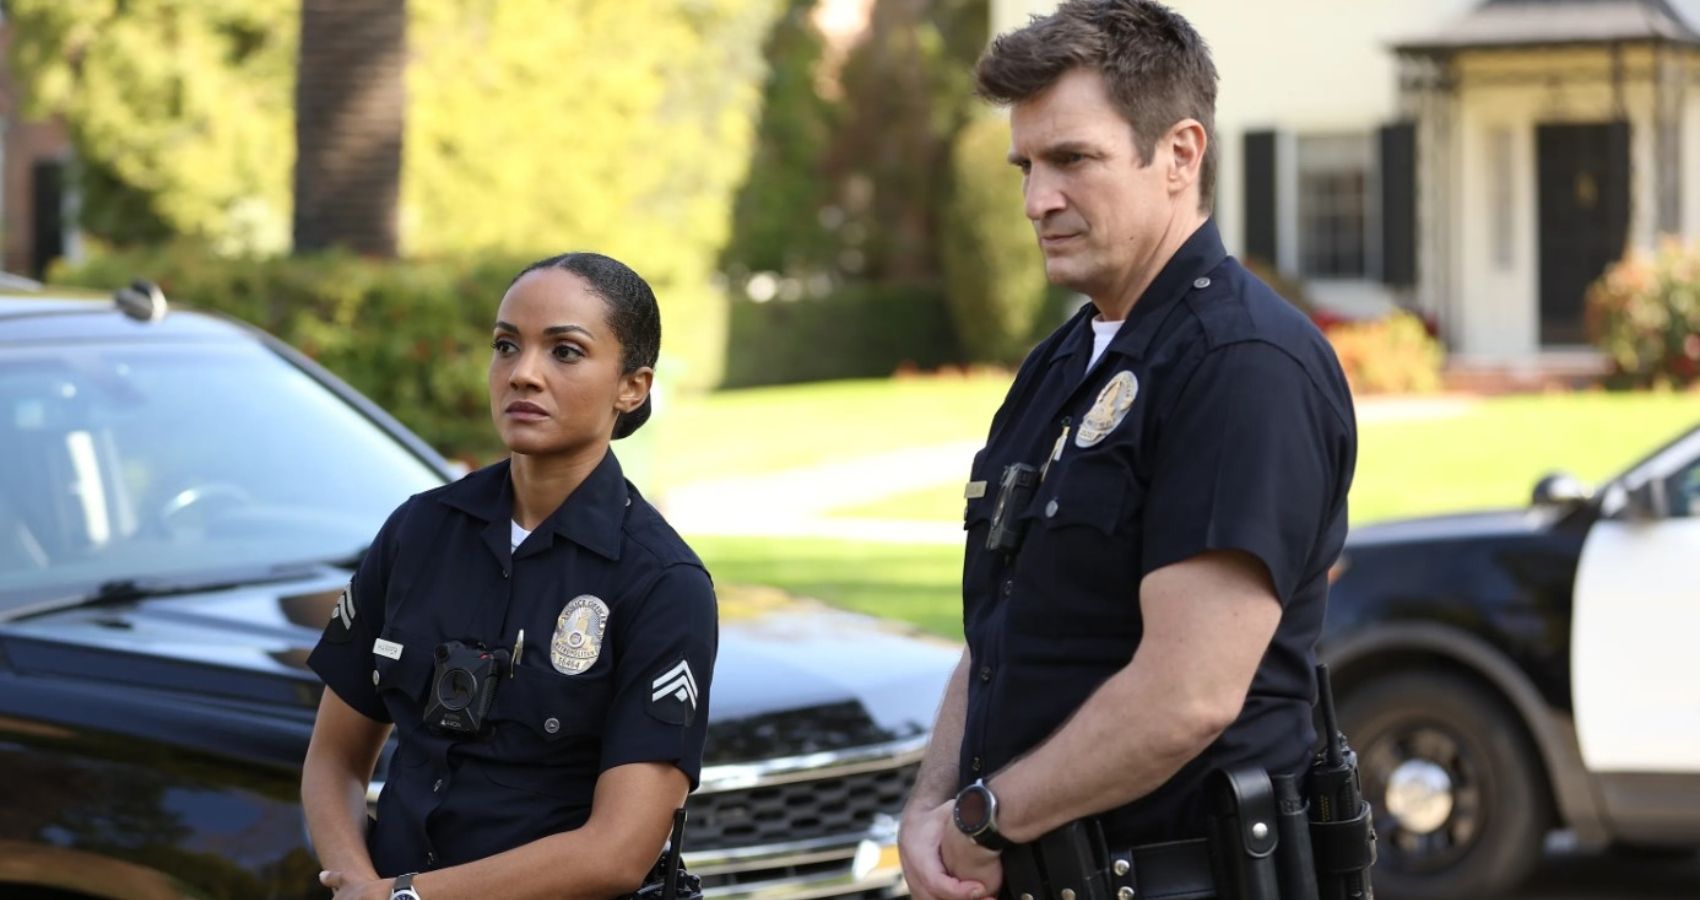 The Rookie Season 5 Plot, Cast, Release Date, and Everything Else We Know